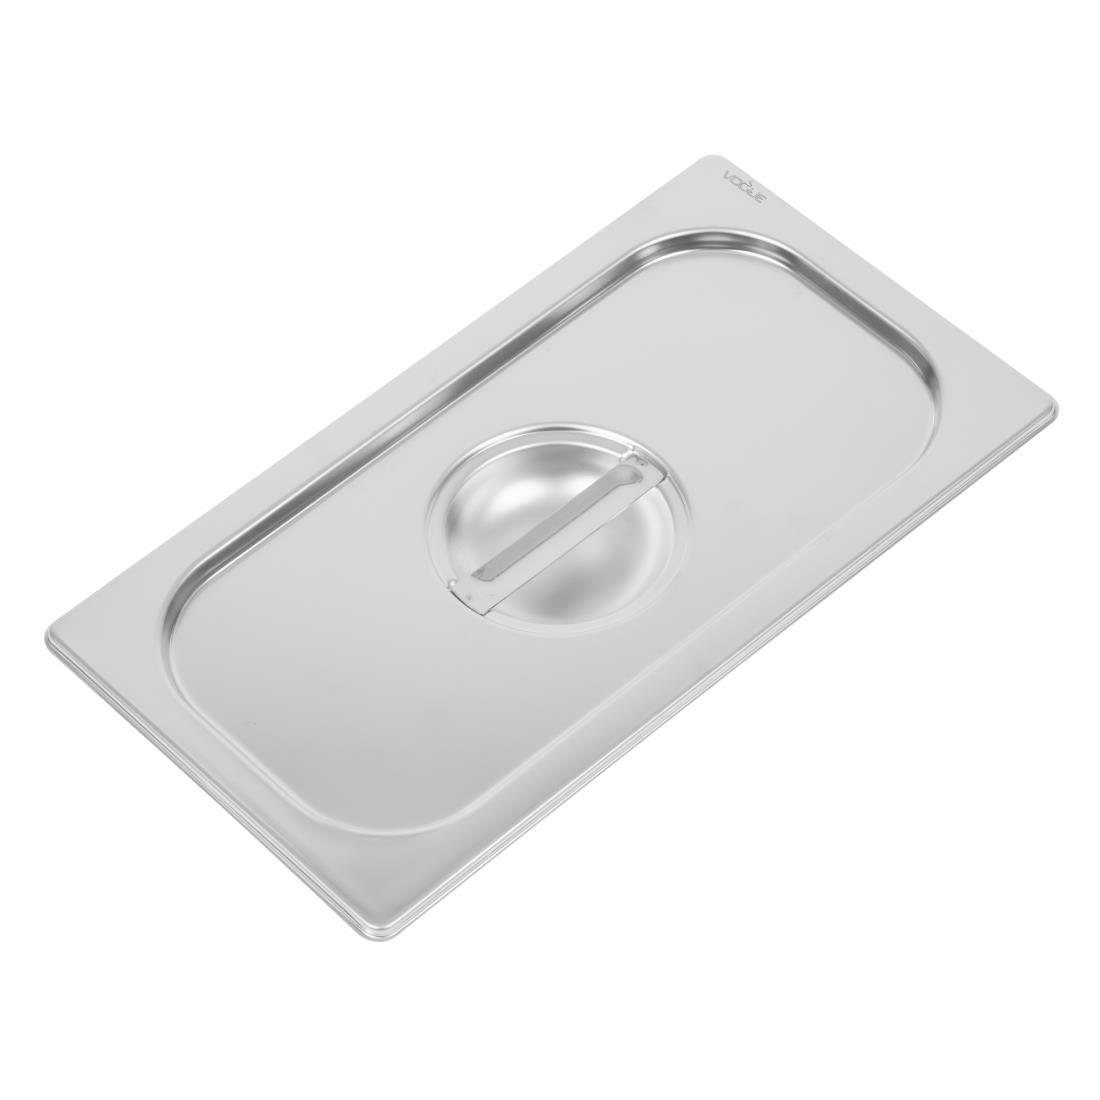 Vogue Heavy Duty Stainless Steel 1/3 Gastronorm Pan Lid - DW457  - 1